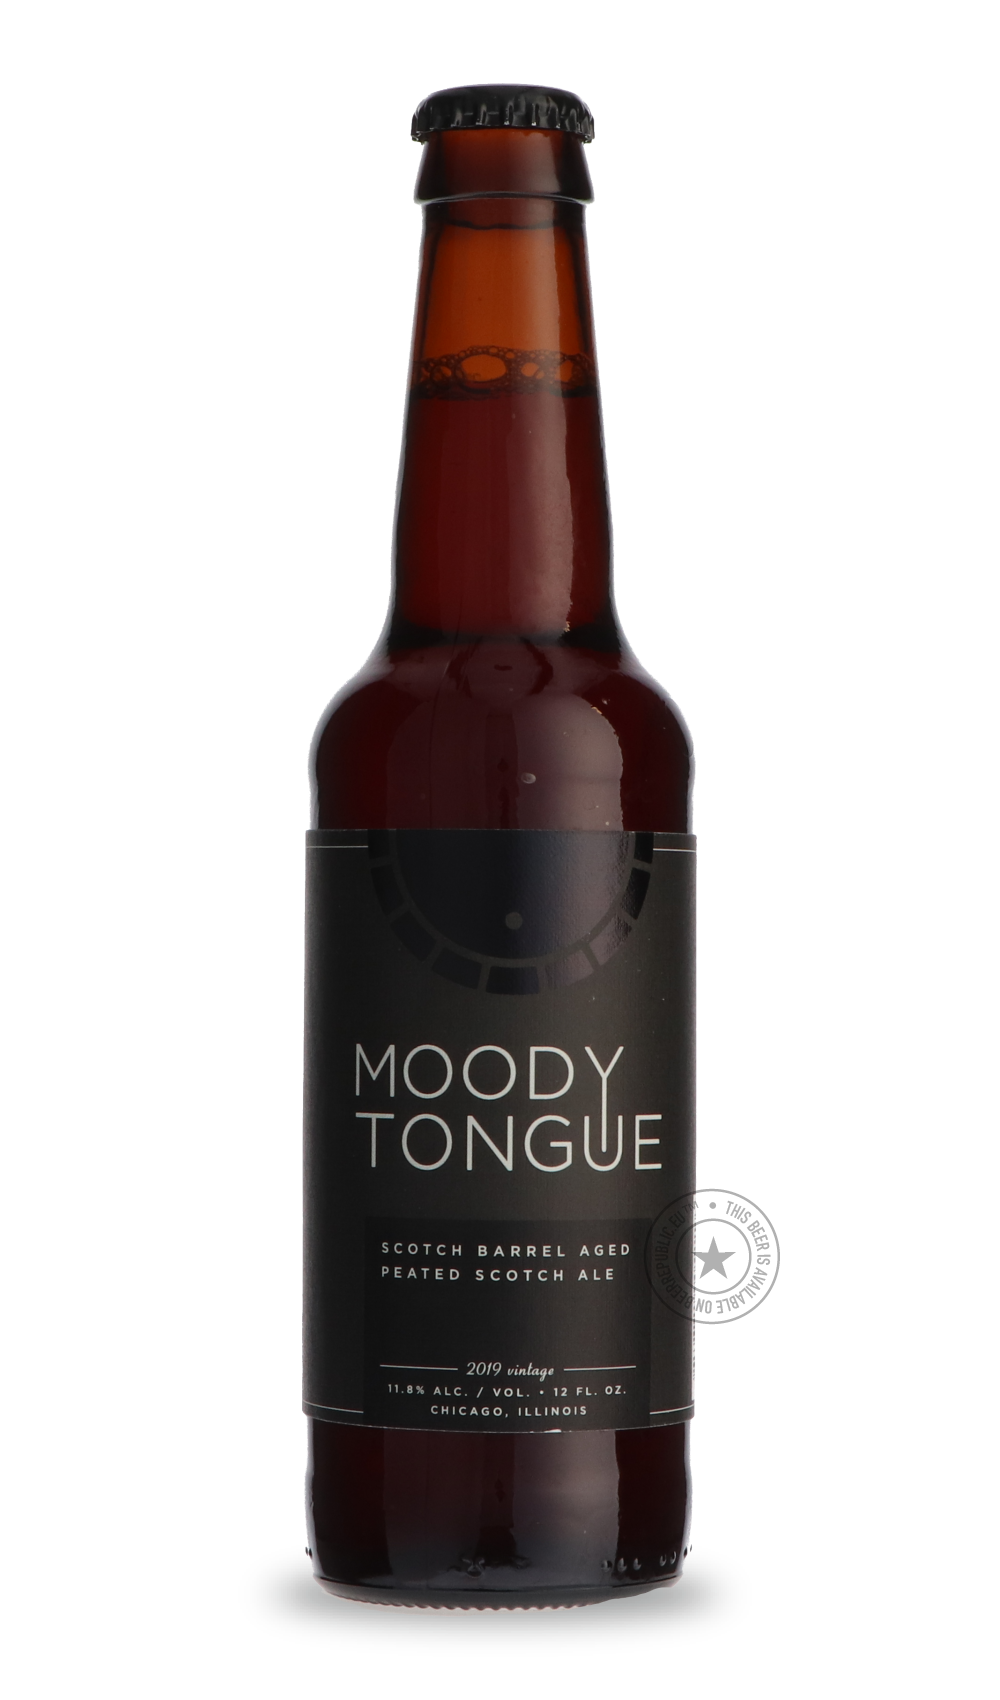 -Moody Tongue- Scotch Barrel Aged Peated Scotch Ale-Brown & Dark- Only @ Beer Republic - The best online beer store for American & Canadian craft beer - Buy beer online from the USA and Canada - Bier online kopen - Amerikaans bier kopen - Craft beer store - Craft beer kopen - Amerikanisch bier kaufen - Bier online kaufen - Acheter biere online - IPA - Stout - Porter - New England IPA - Hazy IPA - Imperial Stout - Barrel Aged - Barrel Aged Imperial Stout - Brown - Dark beer - Blond - Blonde - Pilsner - Lager